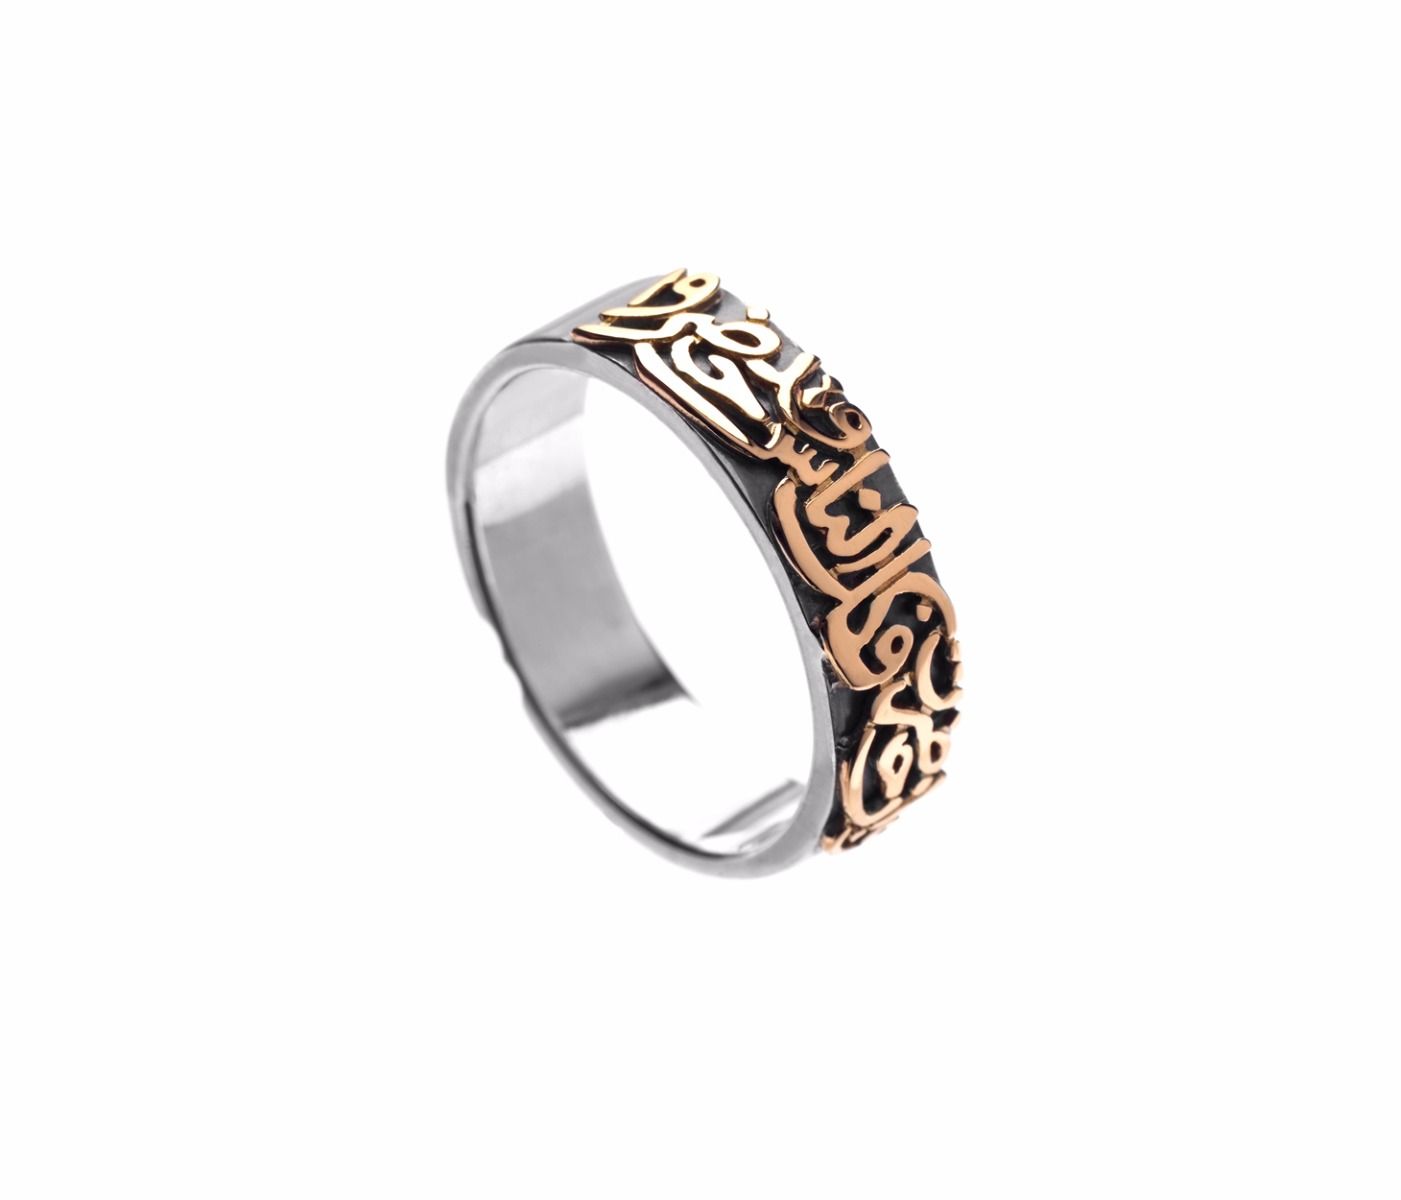 Calligraphy Band For Her by Azza Fahmy - Designer Rings